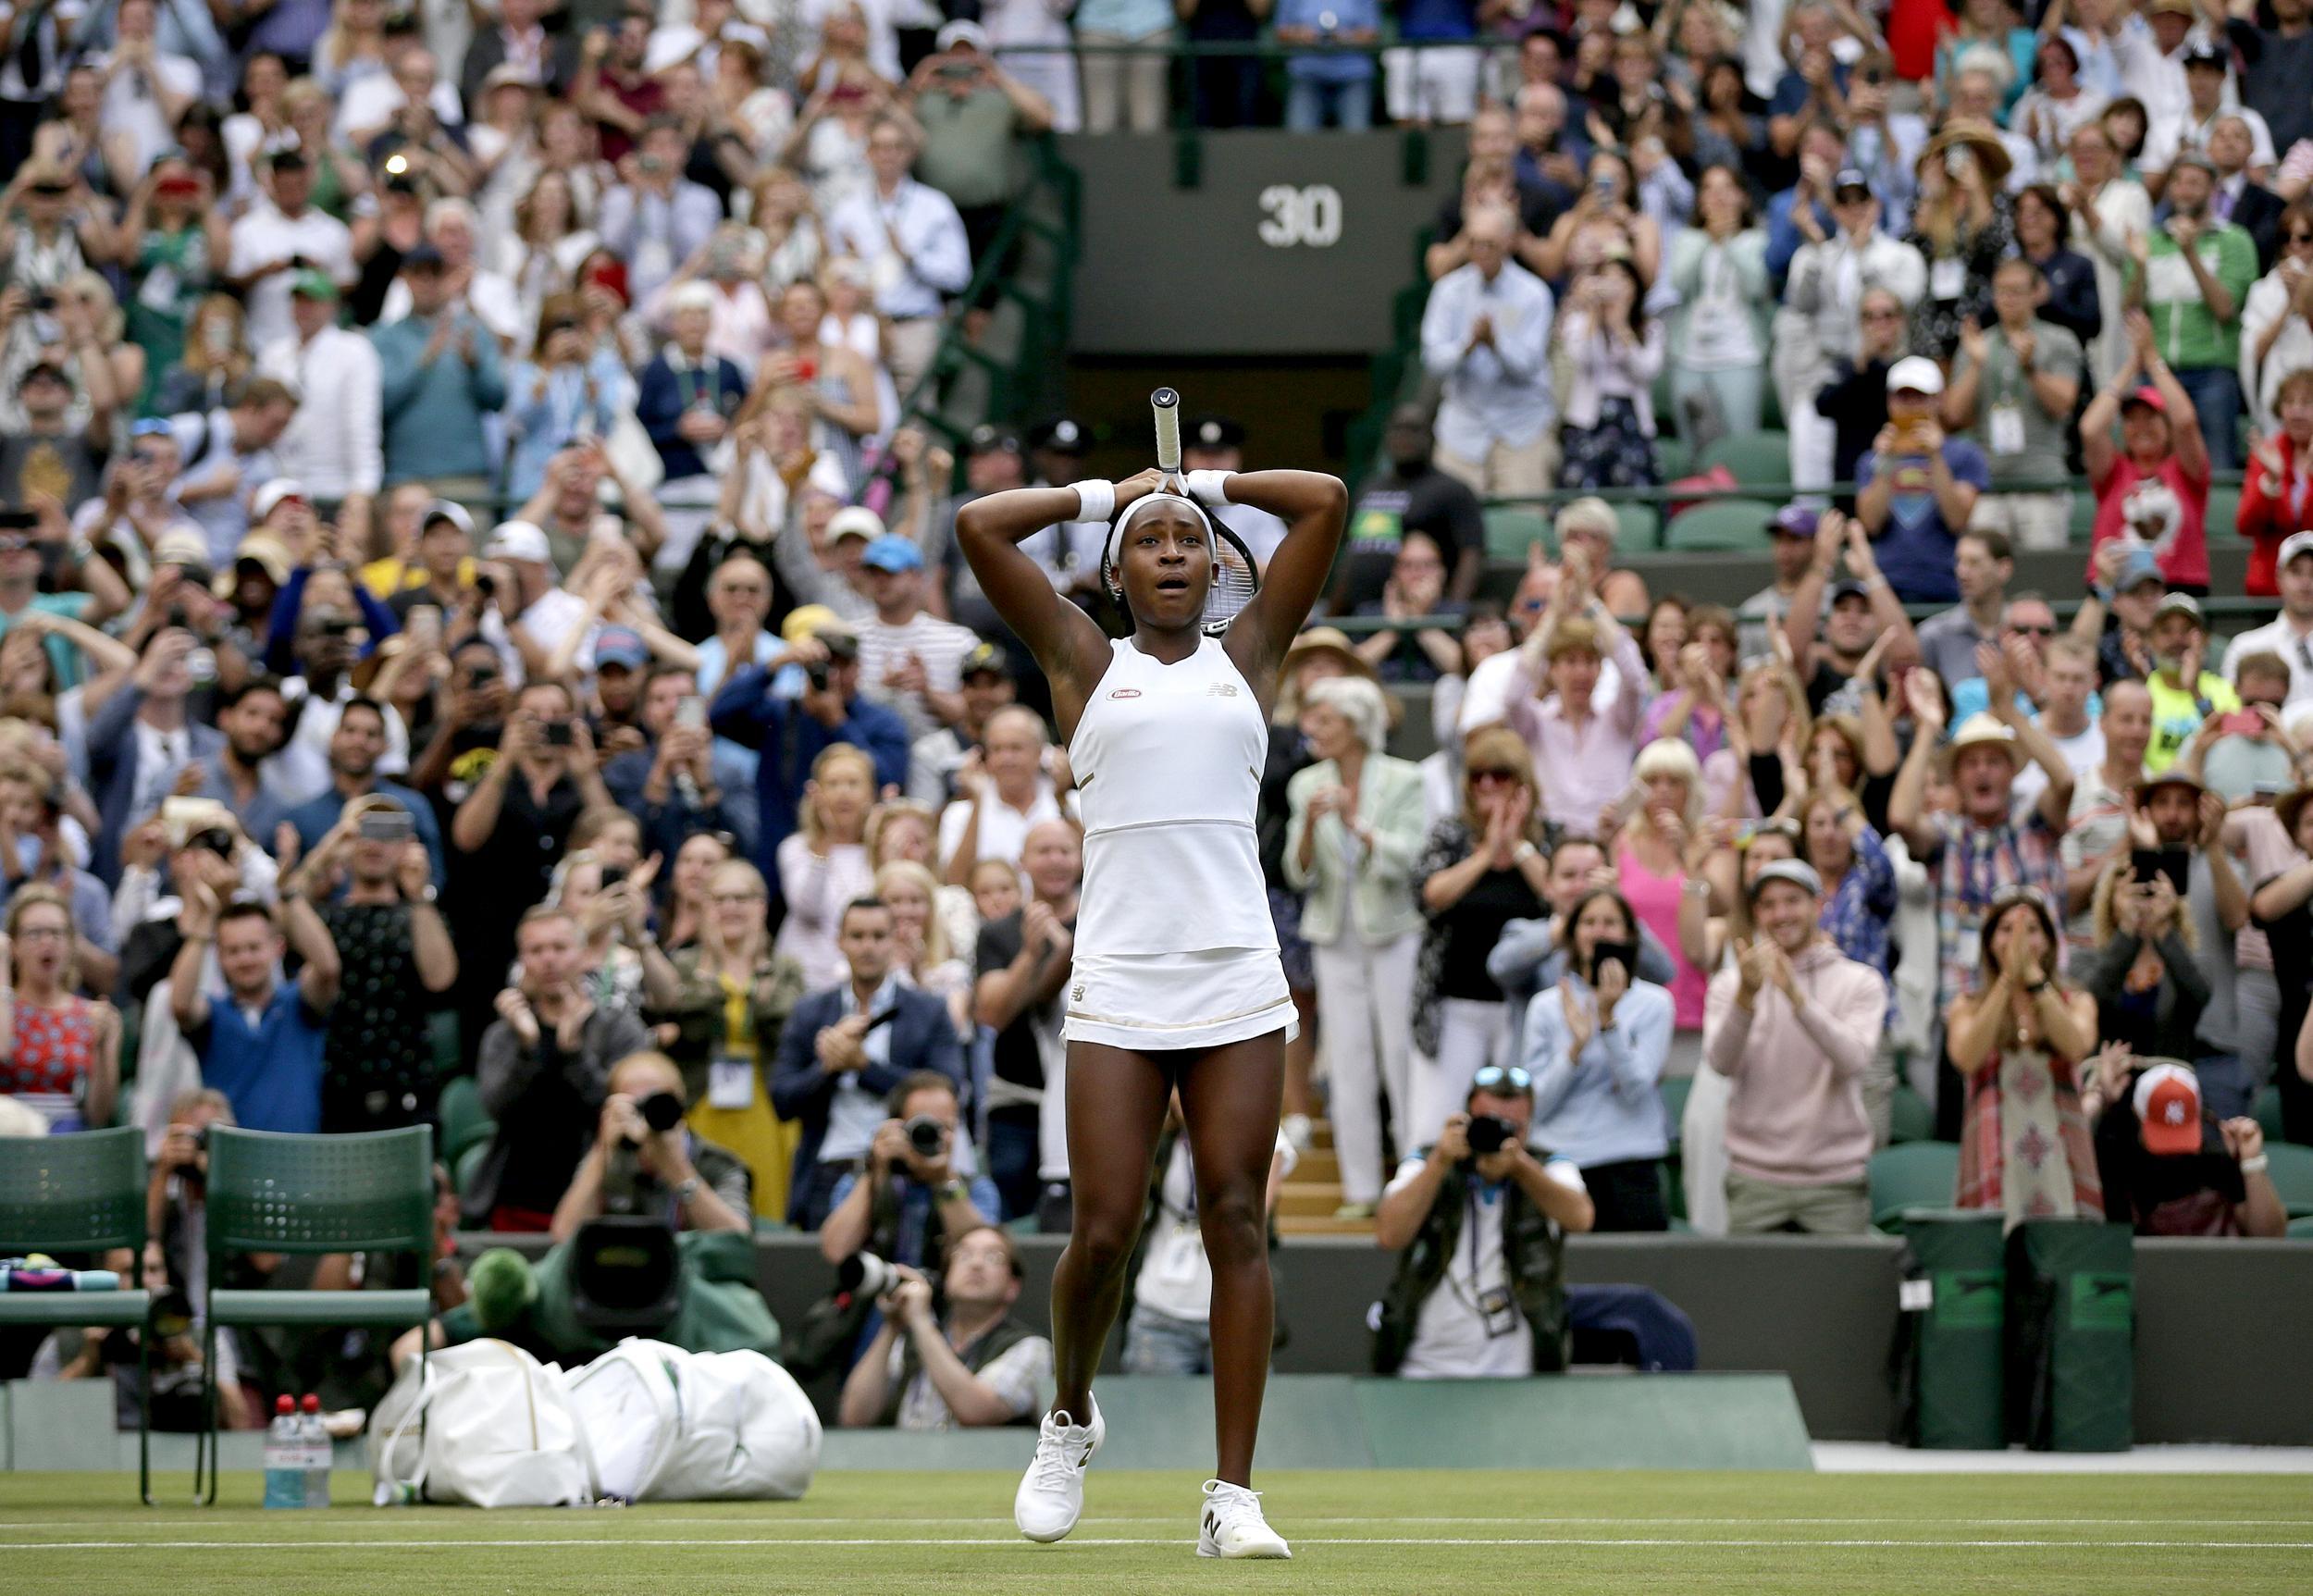 Cori 'Coco' Gauff planned what to say to Venus Williams, but she